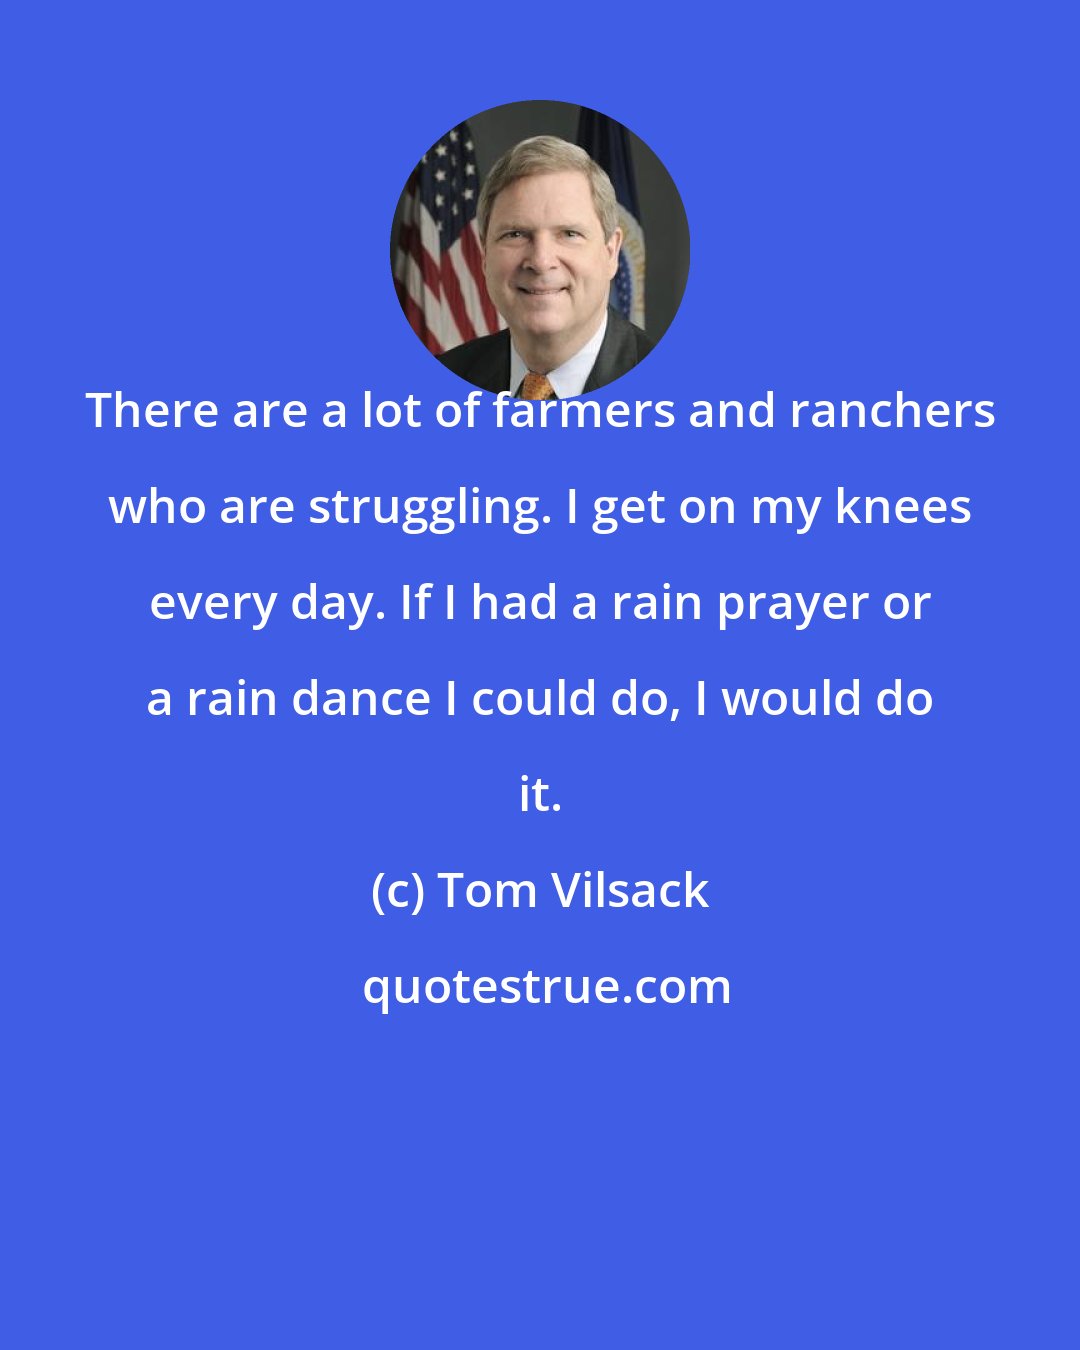 Tom Vilsack: There are a lot of farmers and ranchers who are struggling. I get on my knees every day. If I had a rain prayer or a rain dance I could do, I would do it.